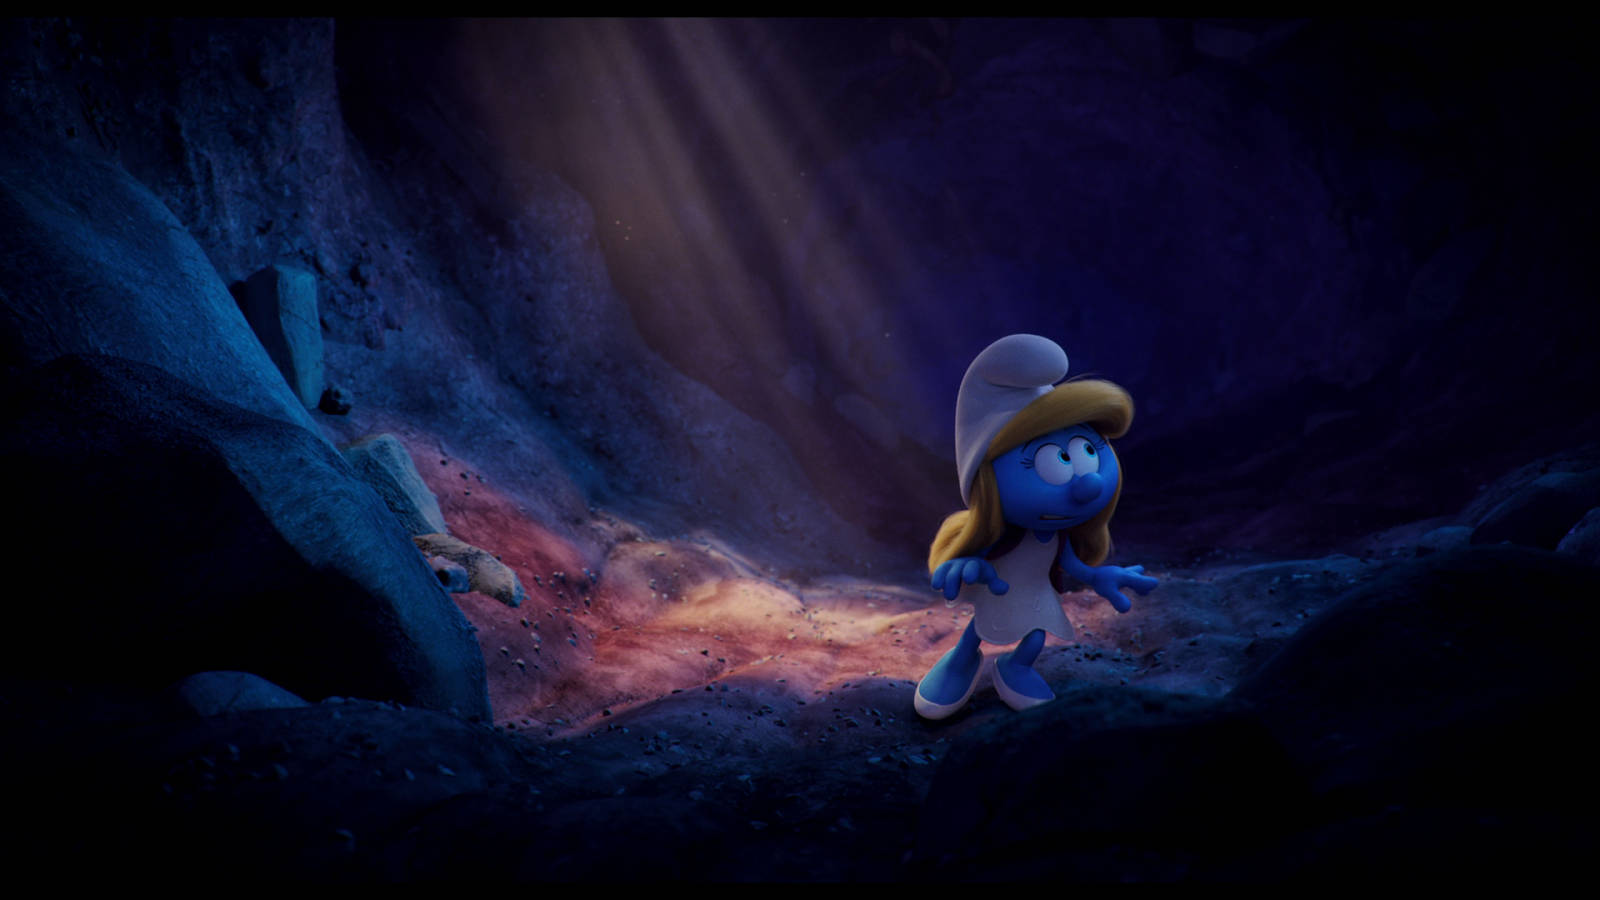 Free The Smurfs Wallpaper Downloads, [100+] The Smurfs Wallpapers for FREE  